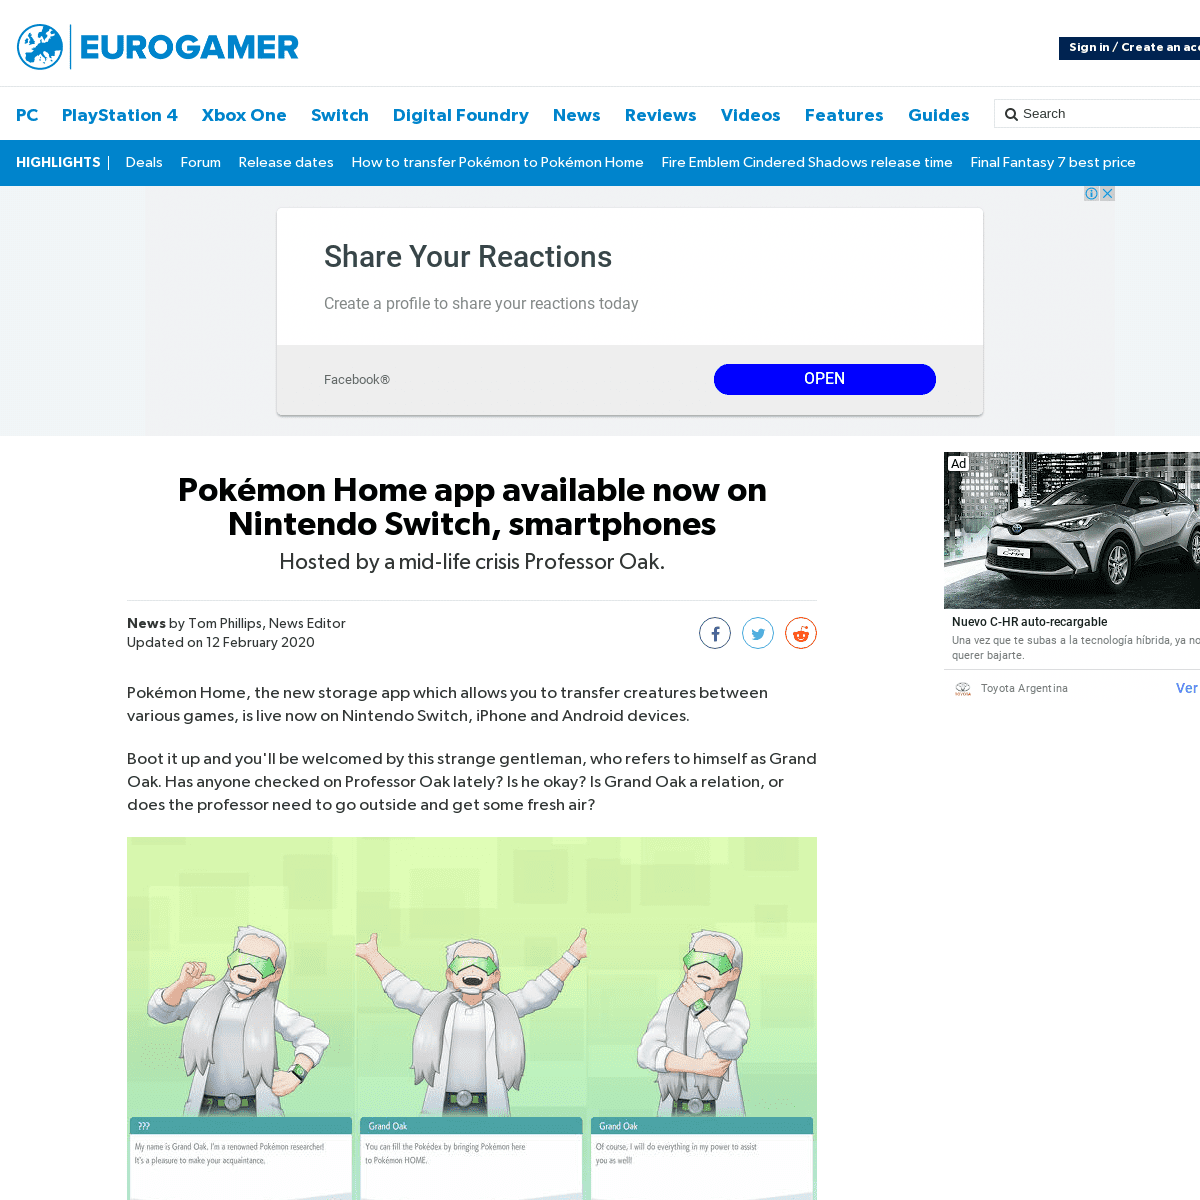 A complete backup of www.eurogamer.net/articles/2020-02-12-pokemon-home-app-available-now-on-nintendo-switch-smartphones